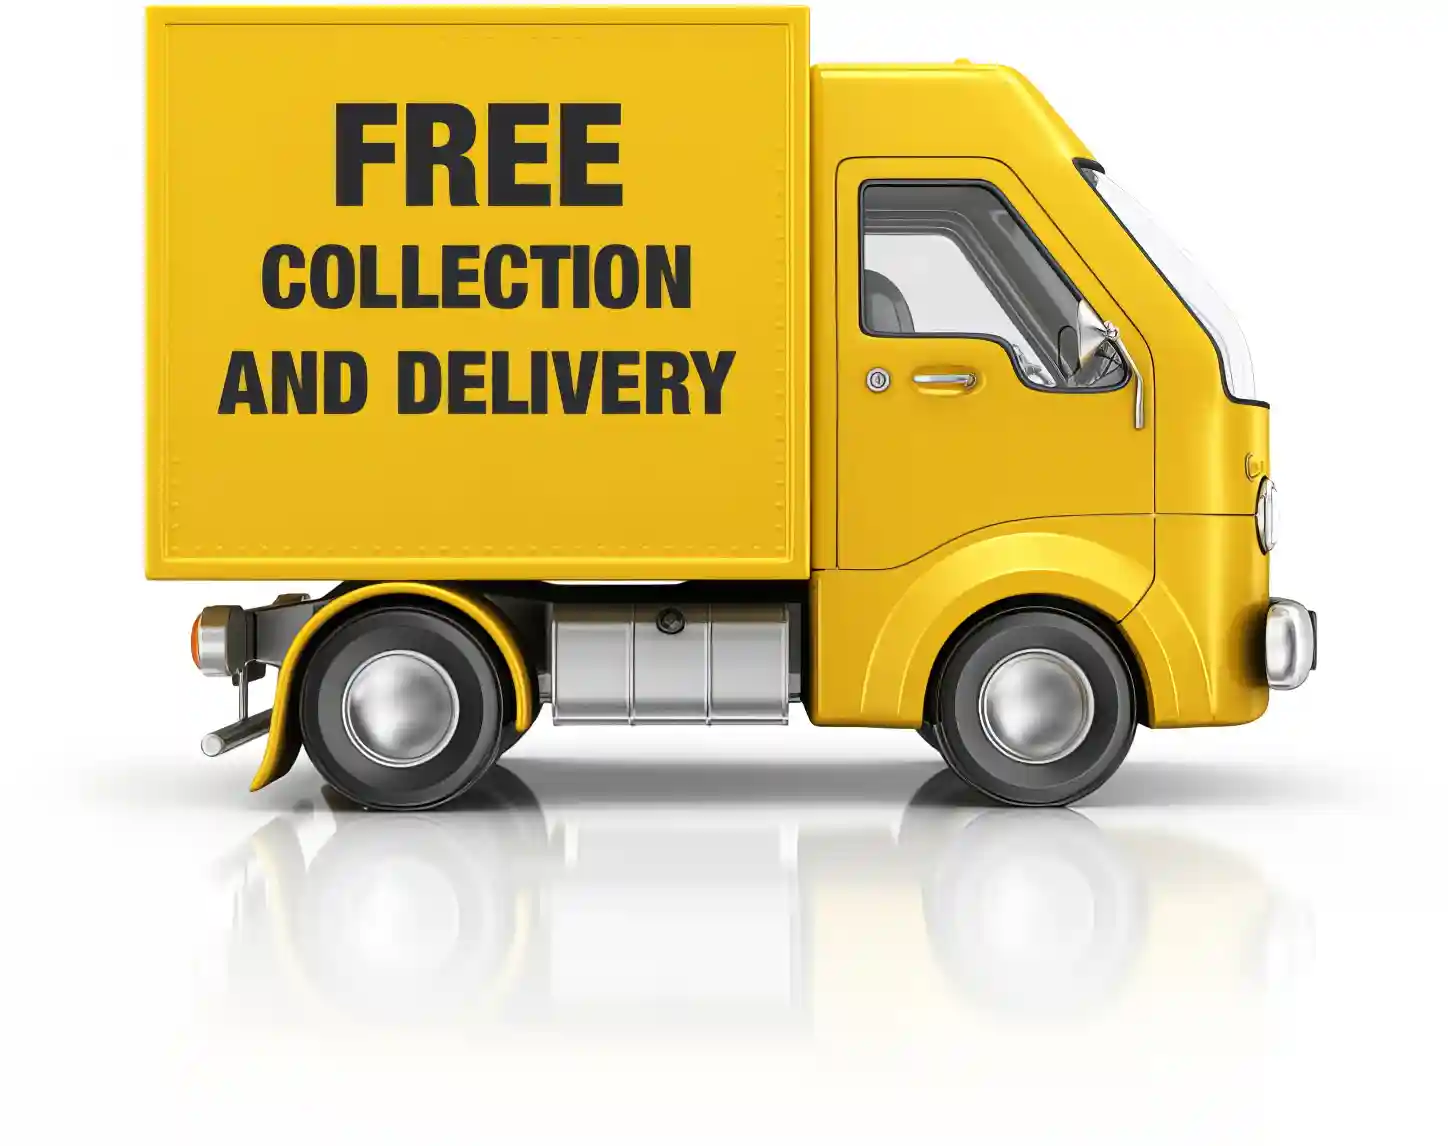 Free Collection and Delivery van